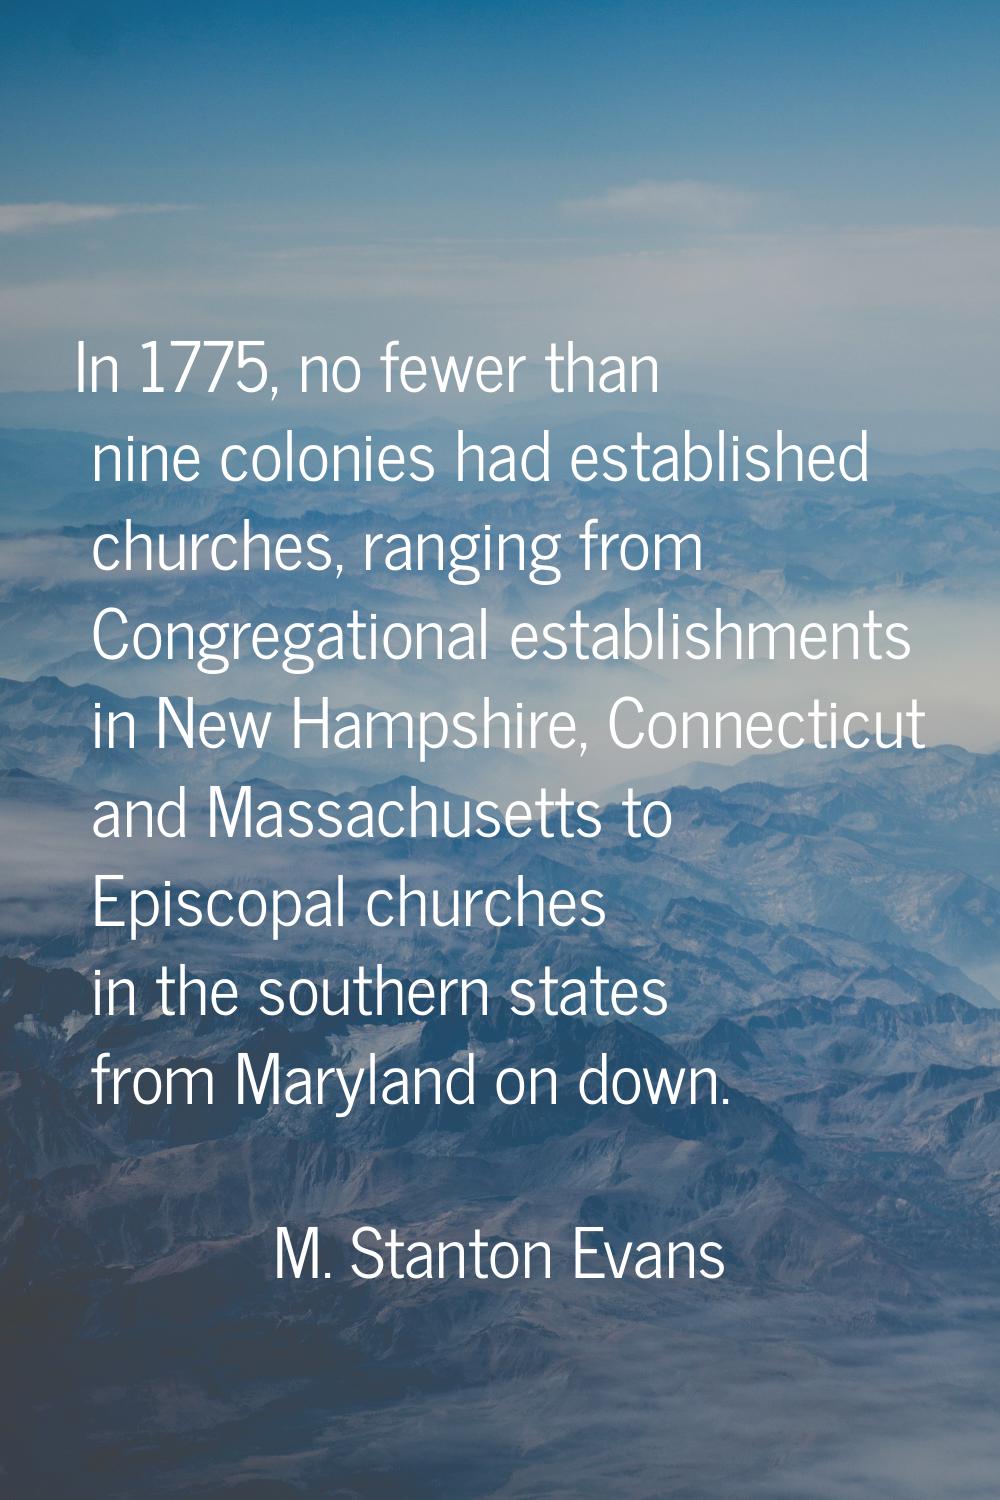 In 1775, no fewer than nine colonies had established churches, ranging from Congregational establis